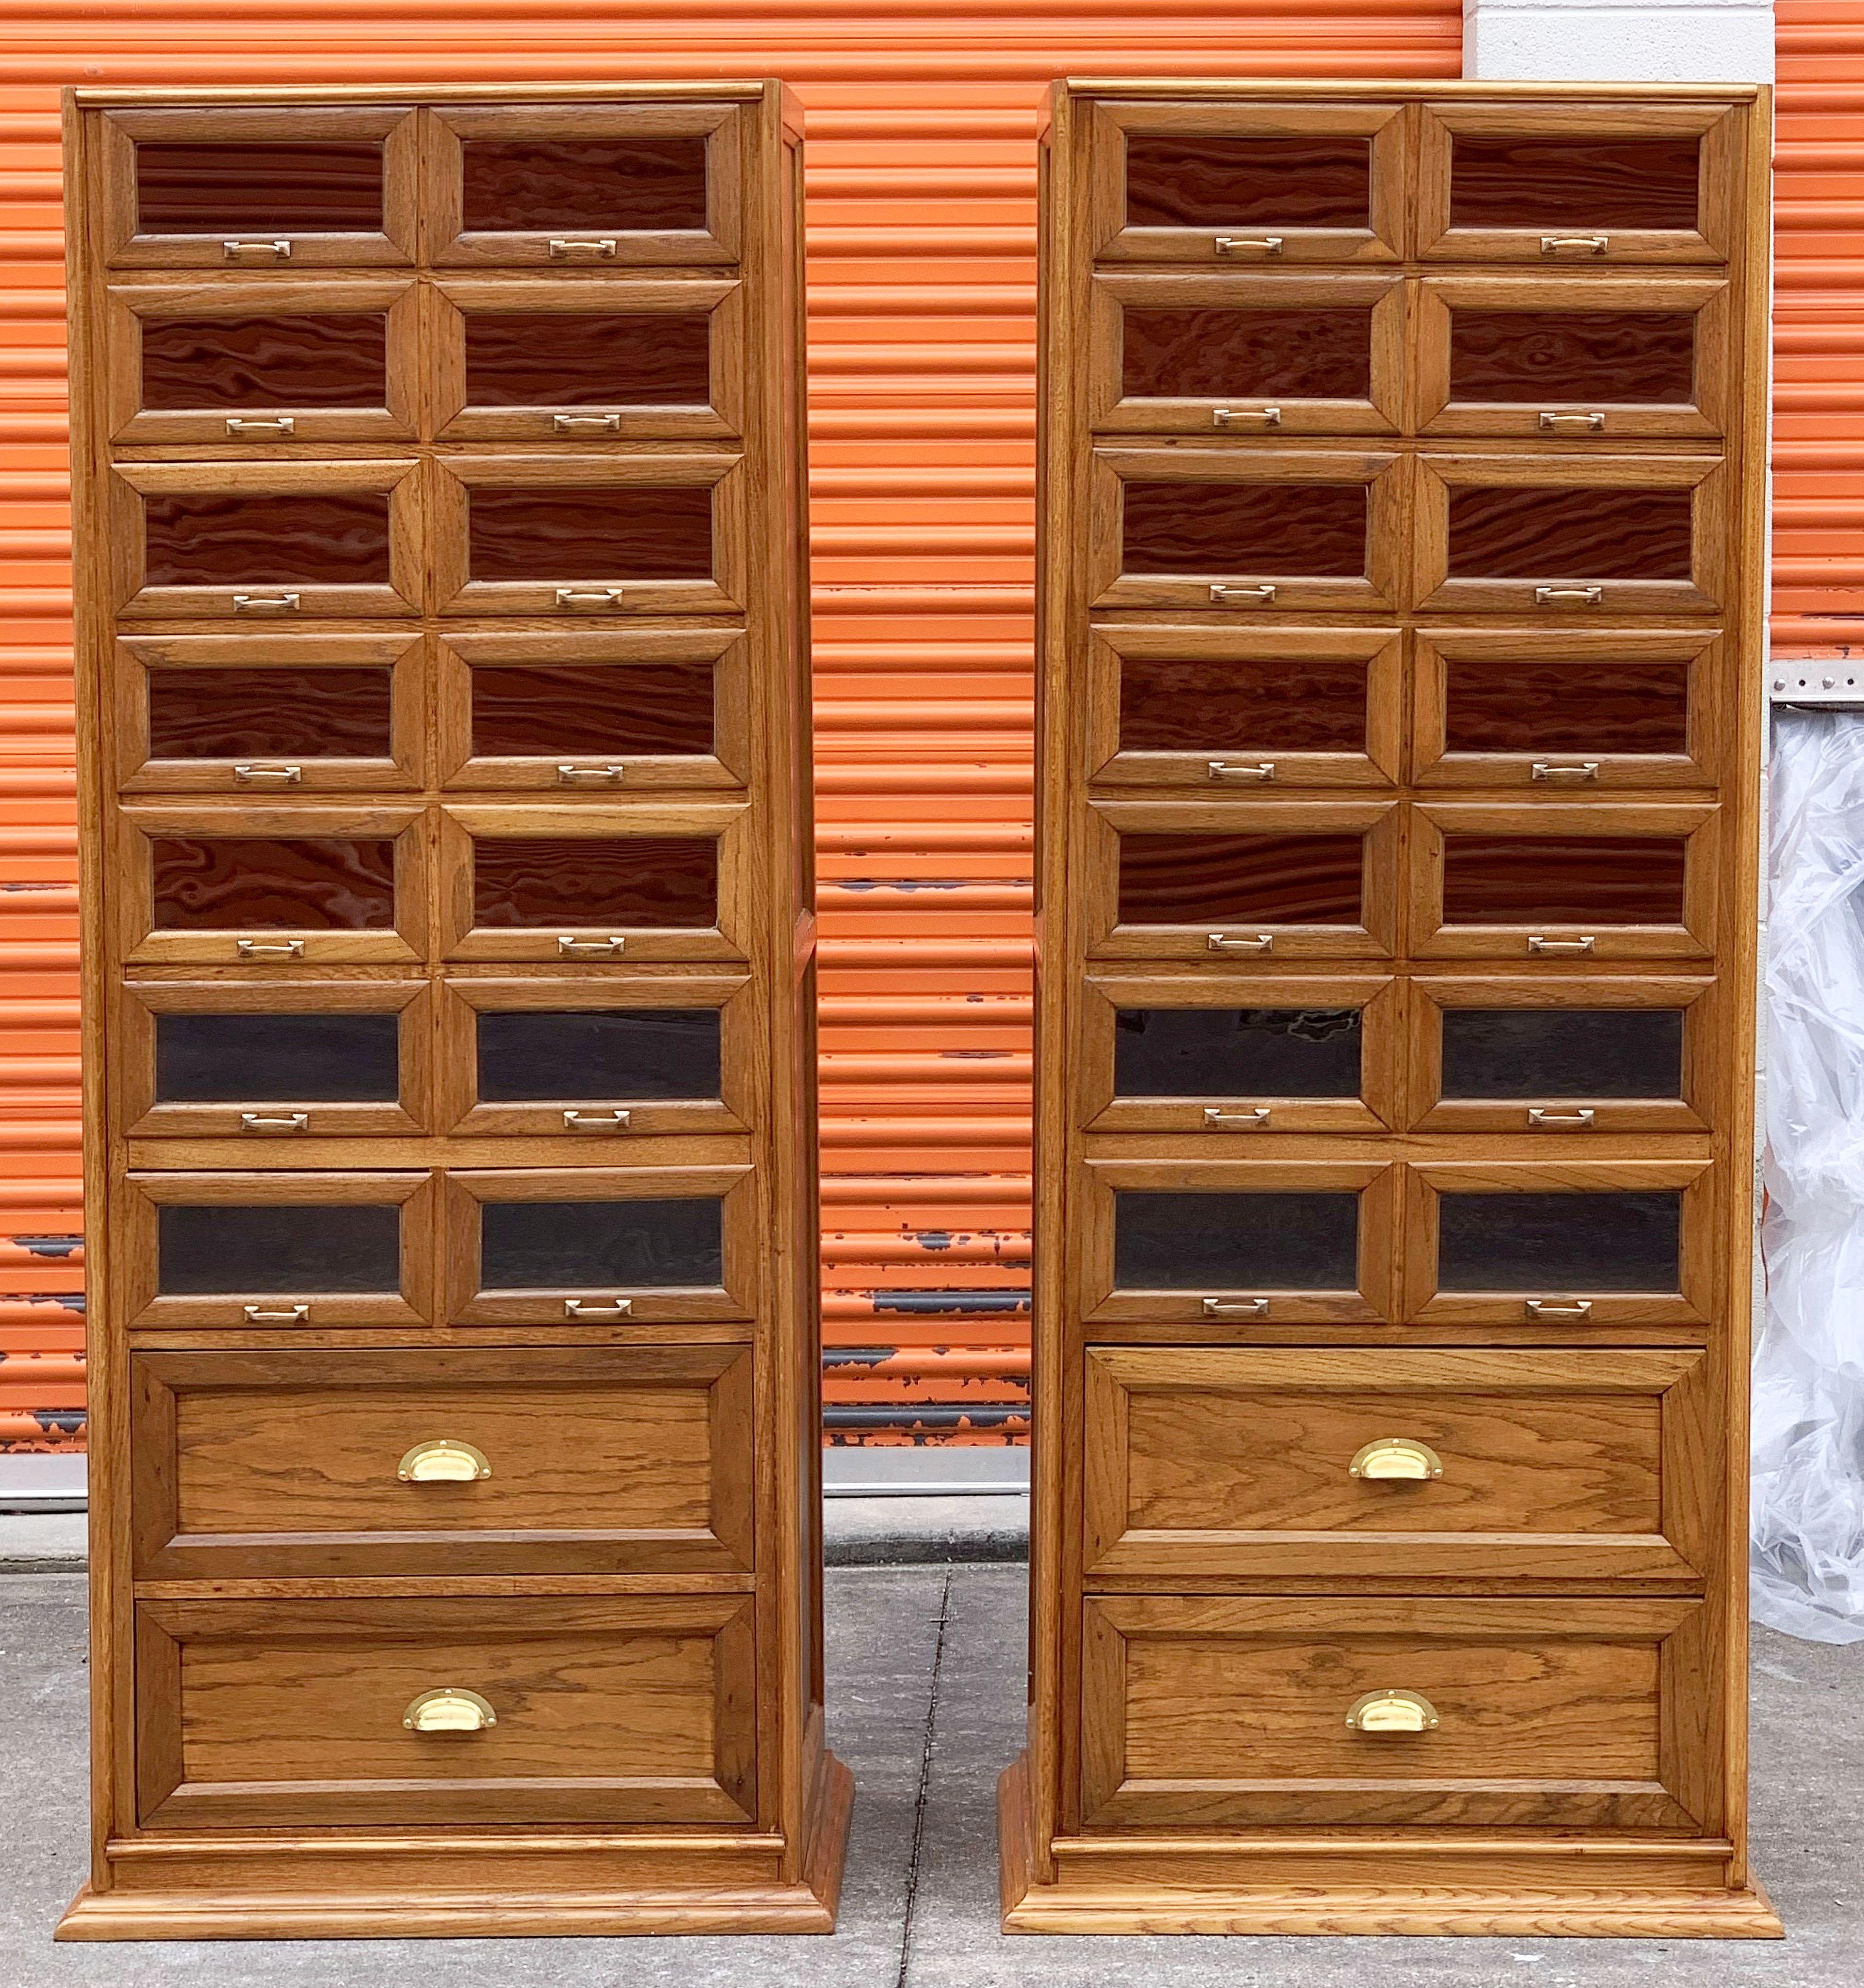 An exceptional pair of large haberdashery or haberdasher's cabinets from England - each featuring:

14 glass fronted drawers over two cupboard drawers, 16 drawers total on each industrial style cabinet.

The fitted drawers with handsome brass